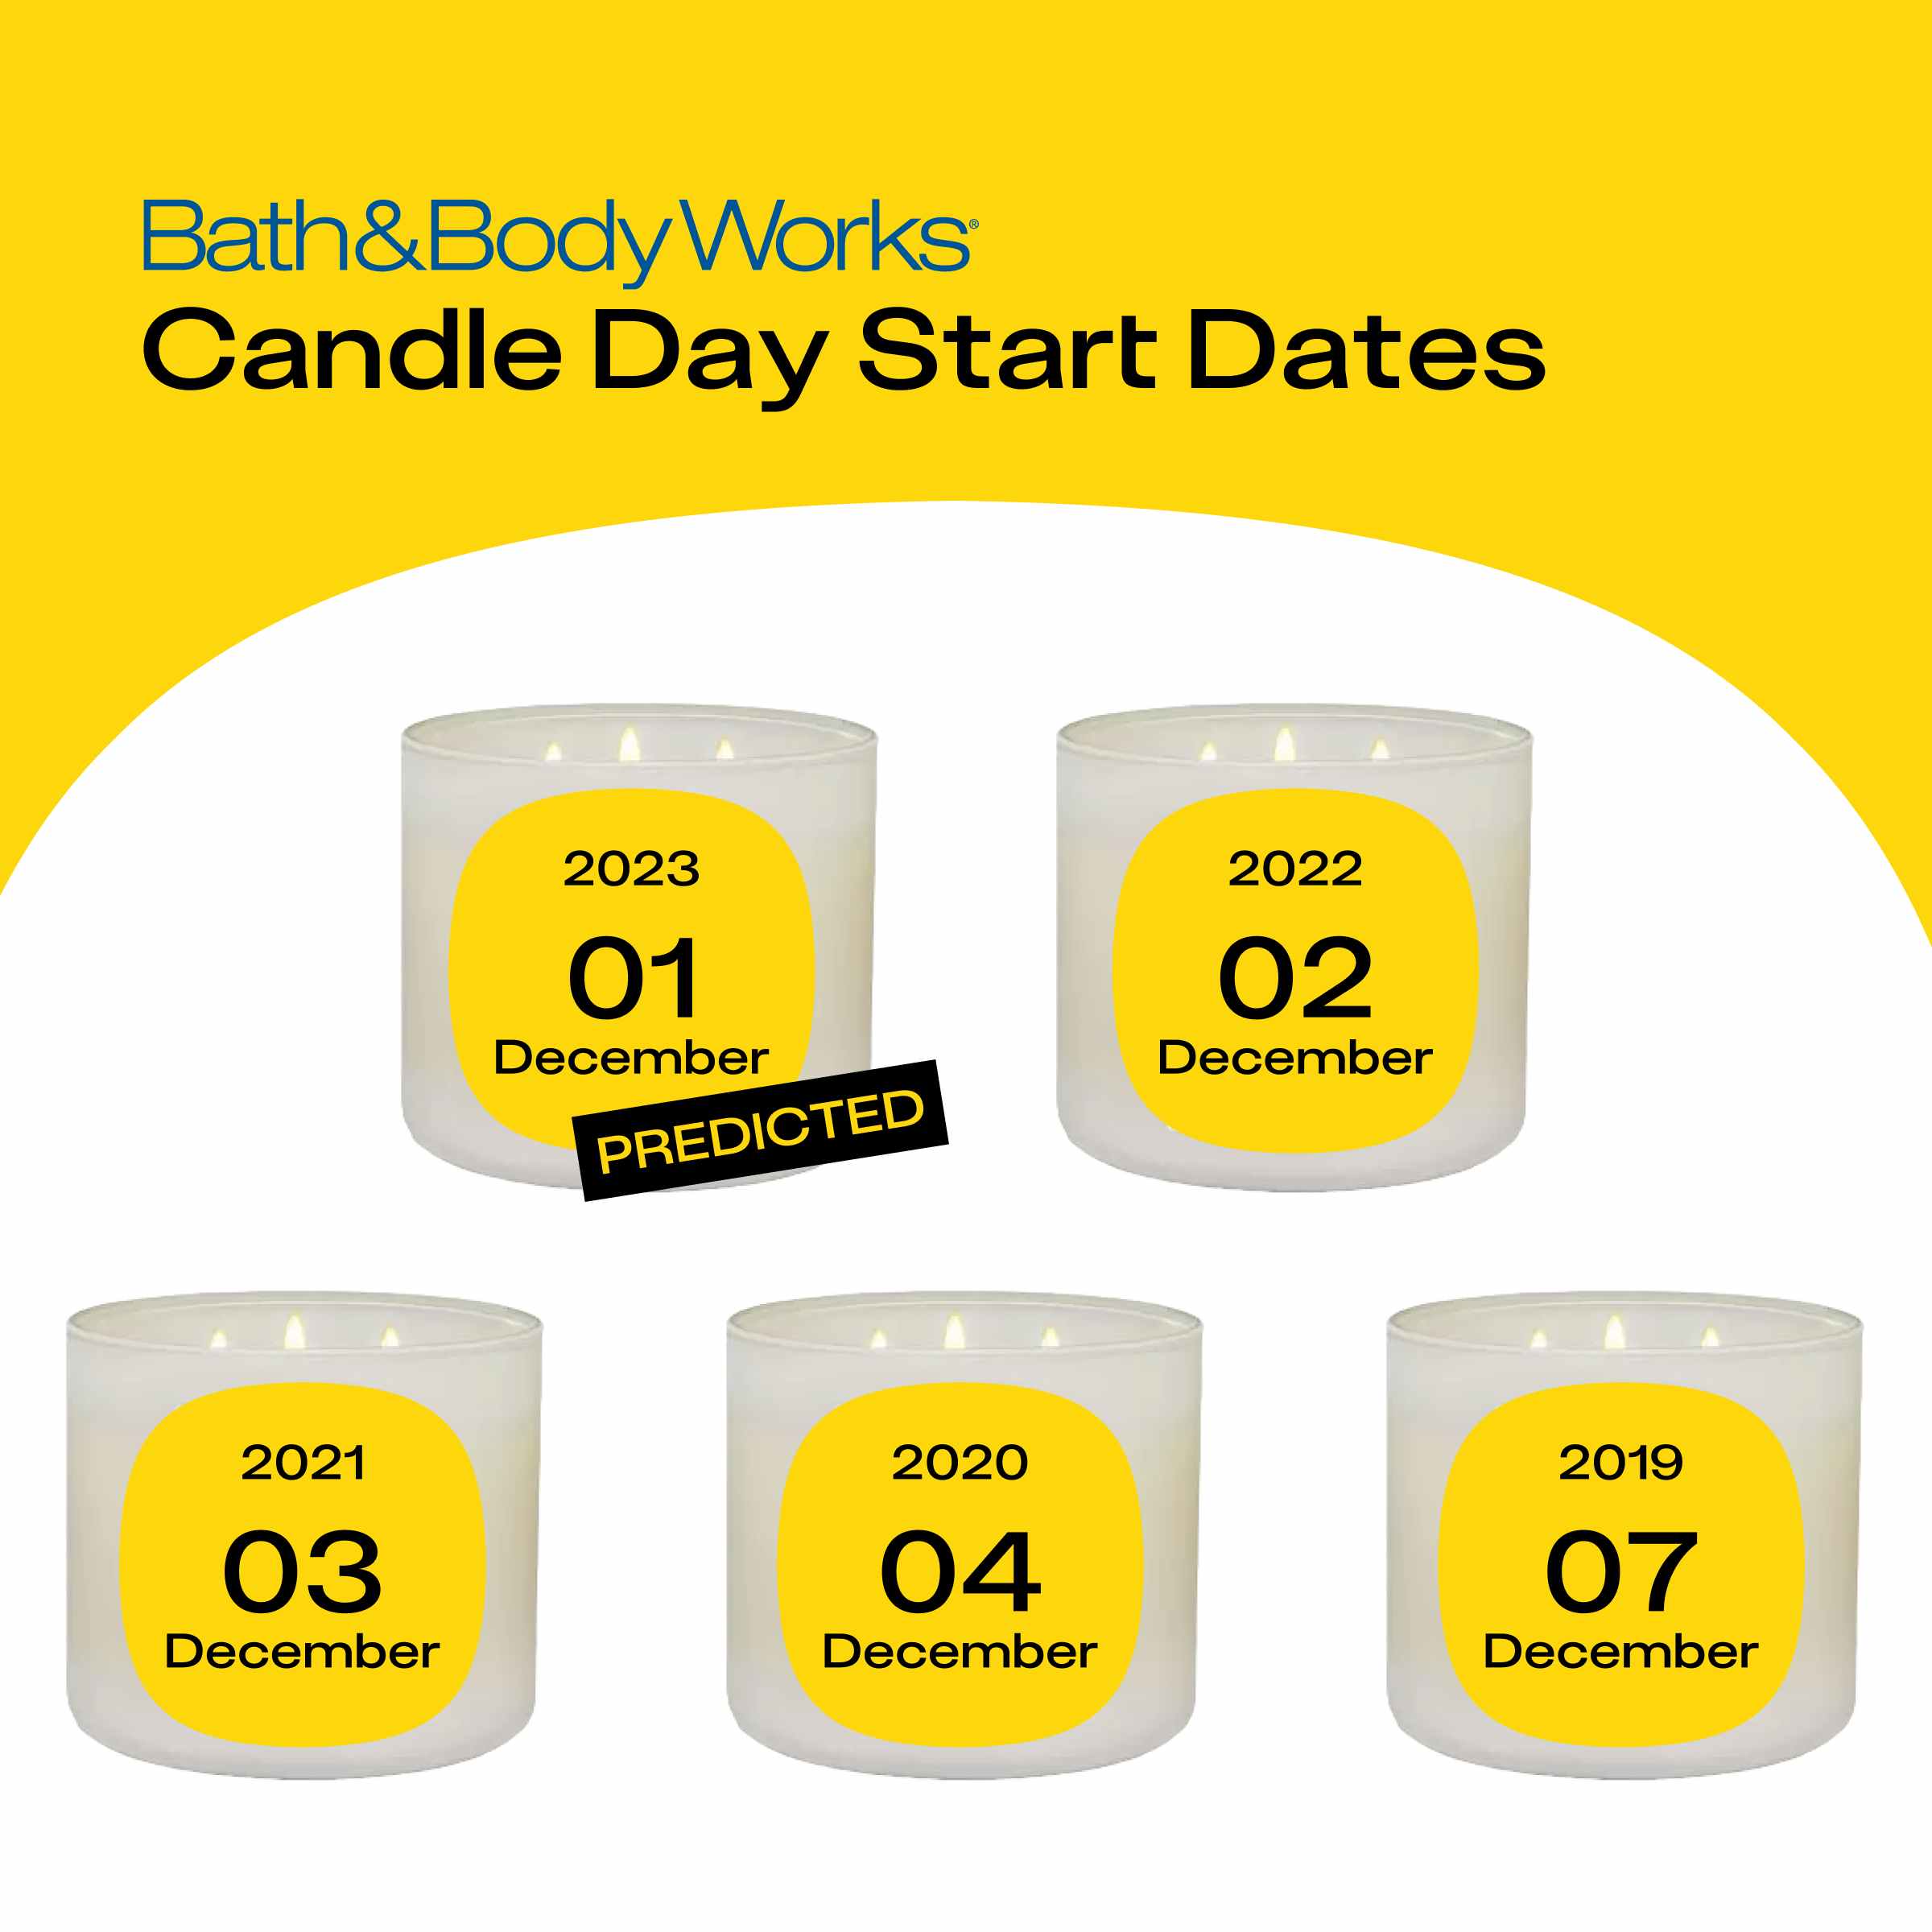 Bath & Body Works' Annual Candle Sale Is Now a 3-Day Event, So